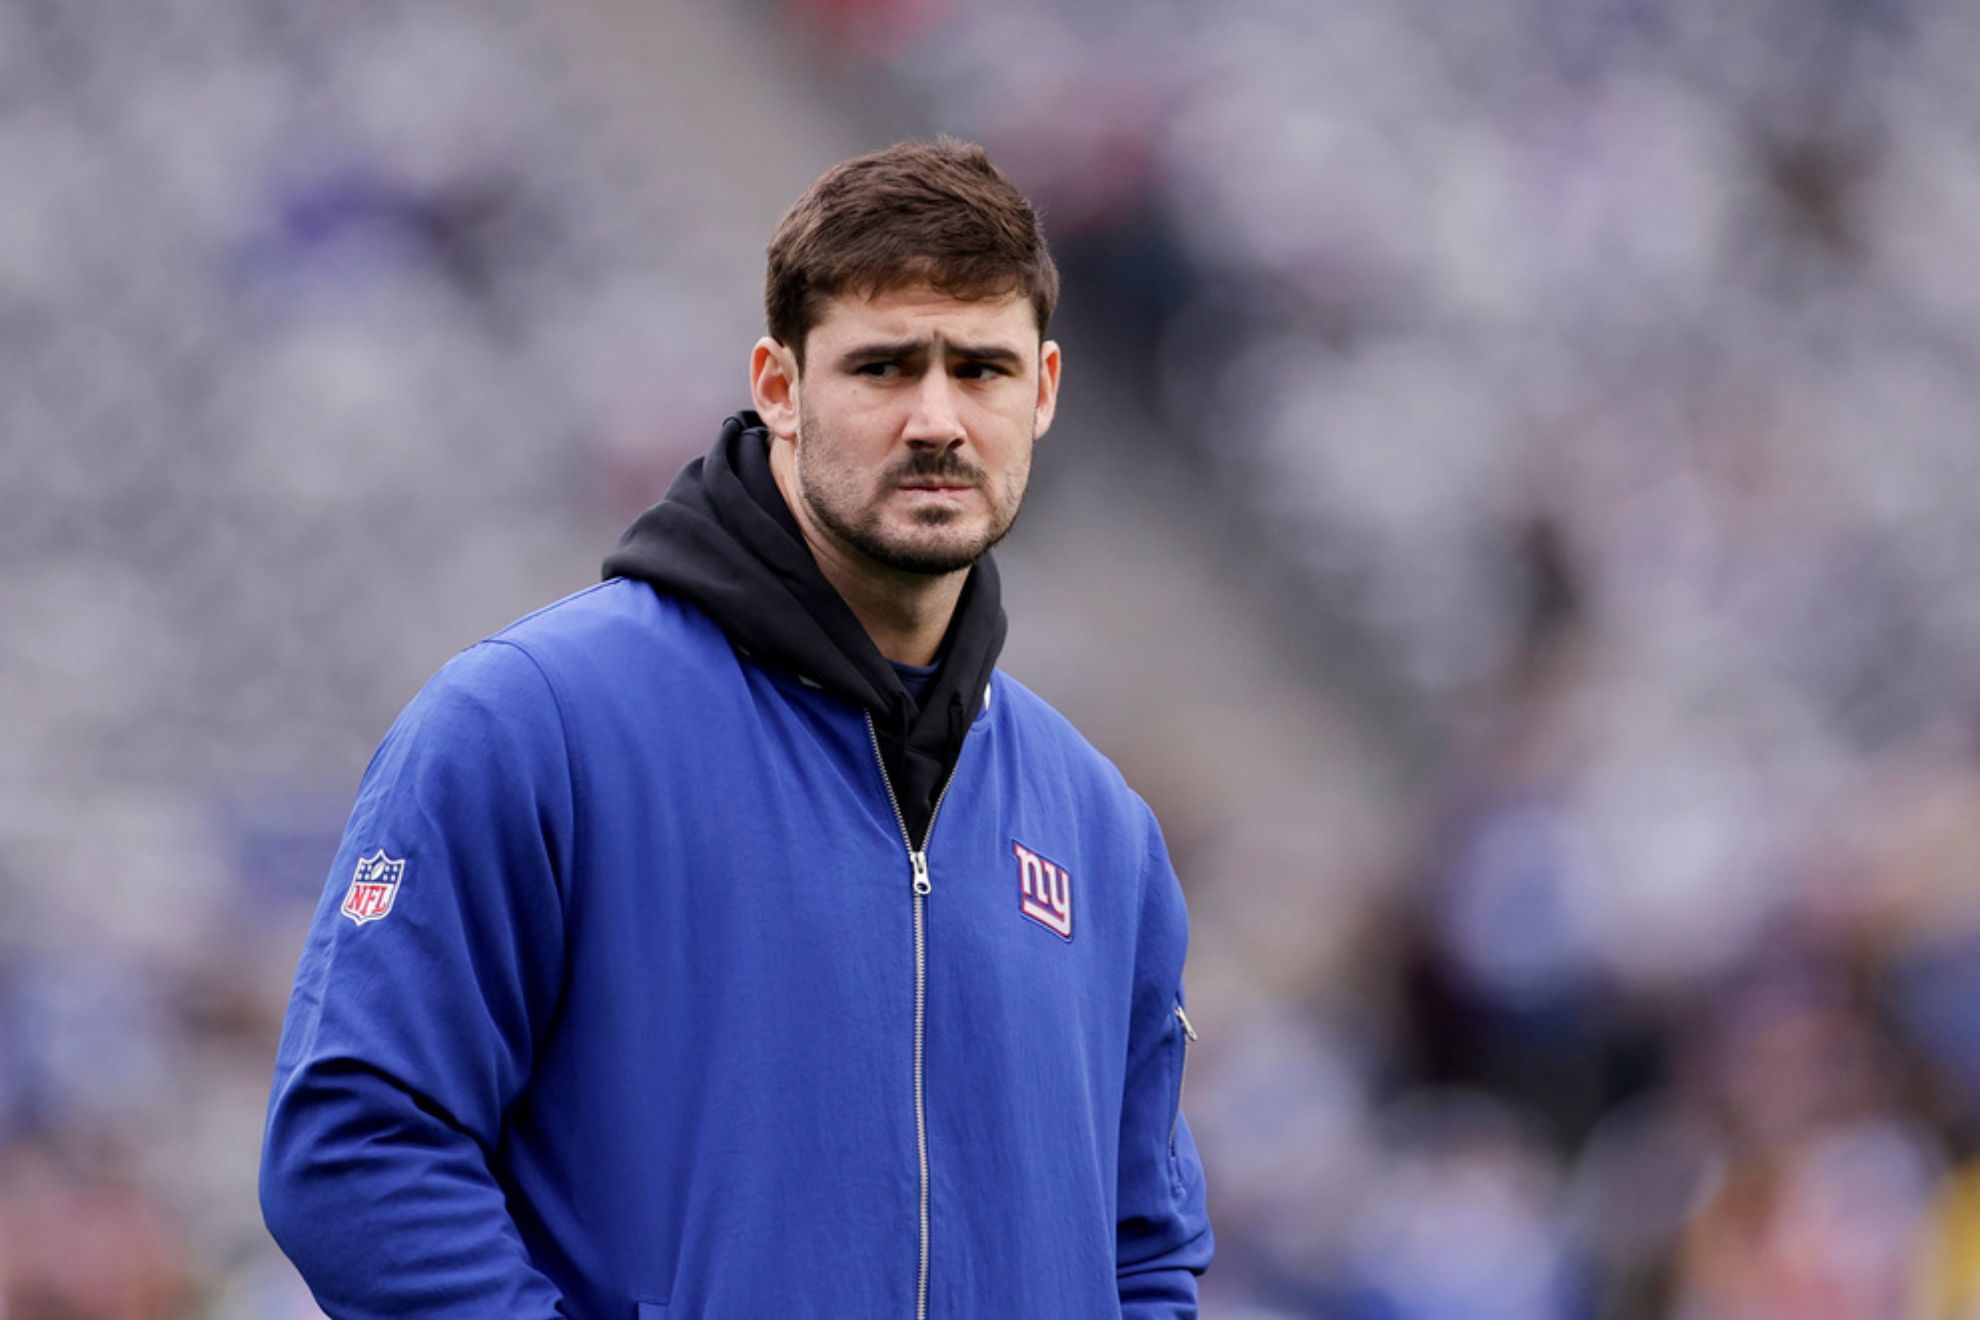 Daniel Jones will seemingly be looking for another team